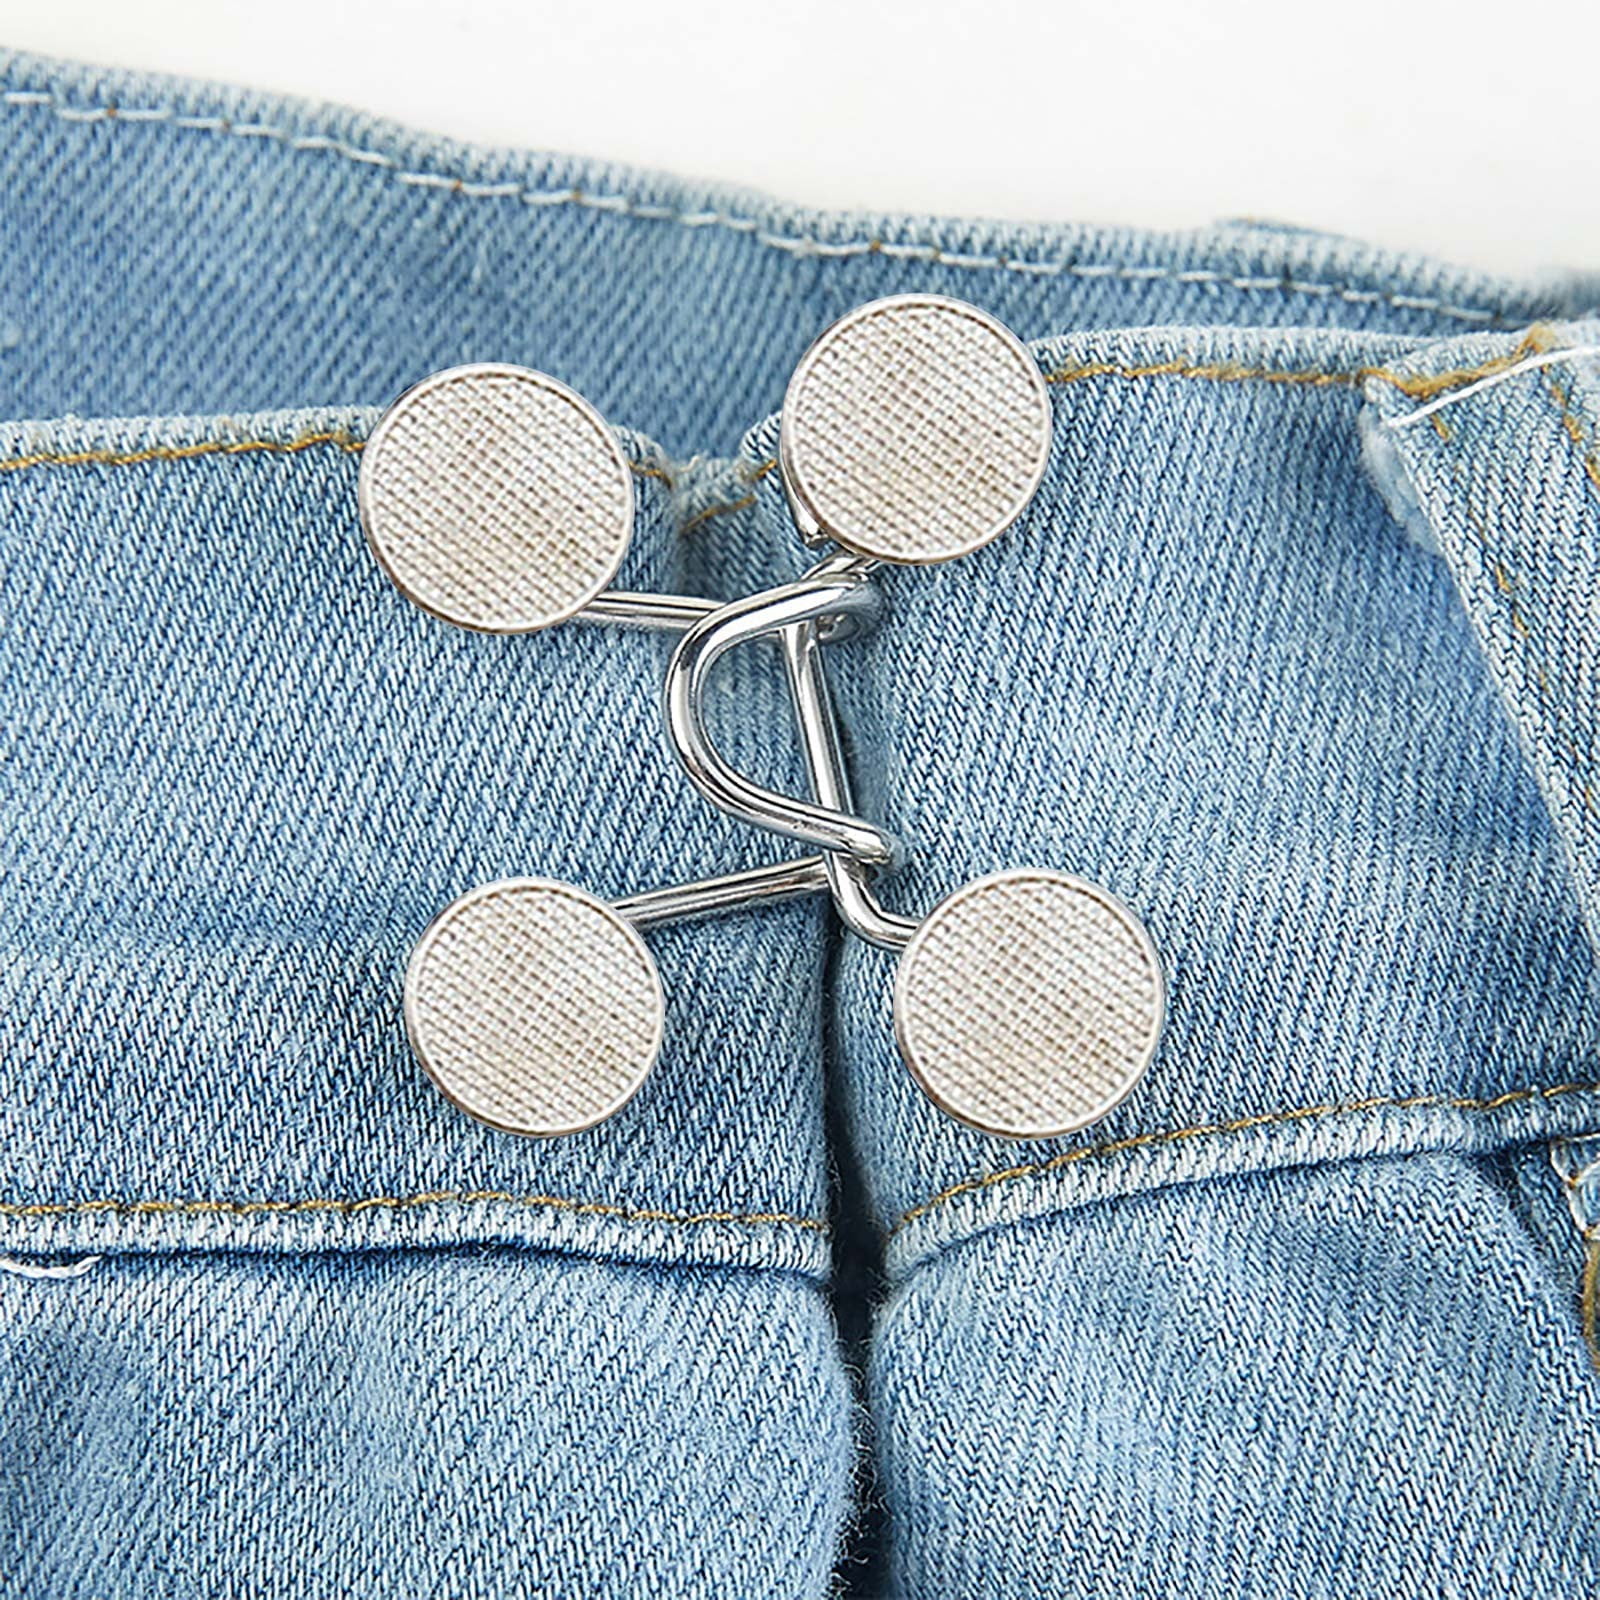  GTAAOY Jean Buttons Pins, 8 Set Pant Waist Tightener,  Adjustable Jean Button Pin, No Sewing Required, Jeans Button Replacement  Pant Clips for Women Skirt Pant Jeans（White Black Pearl）